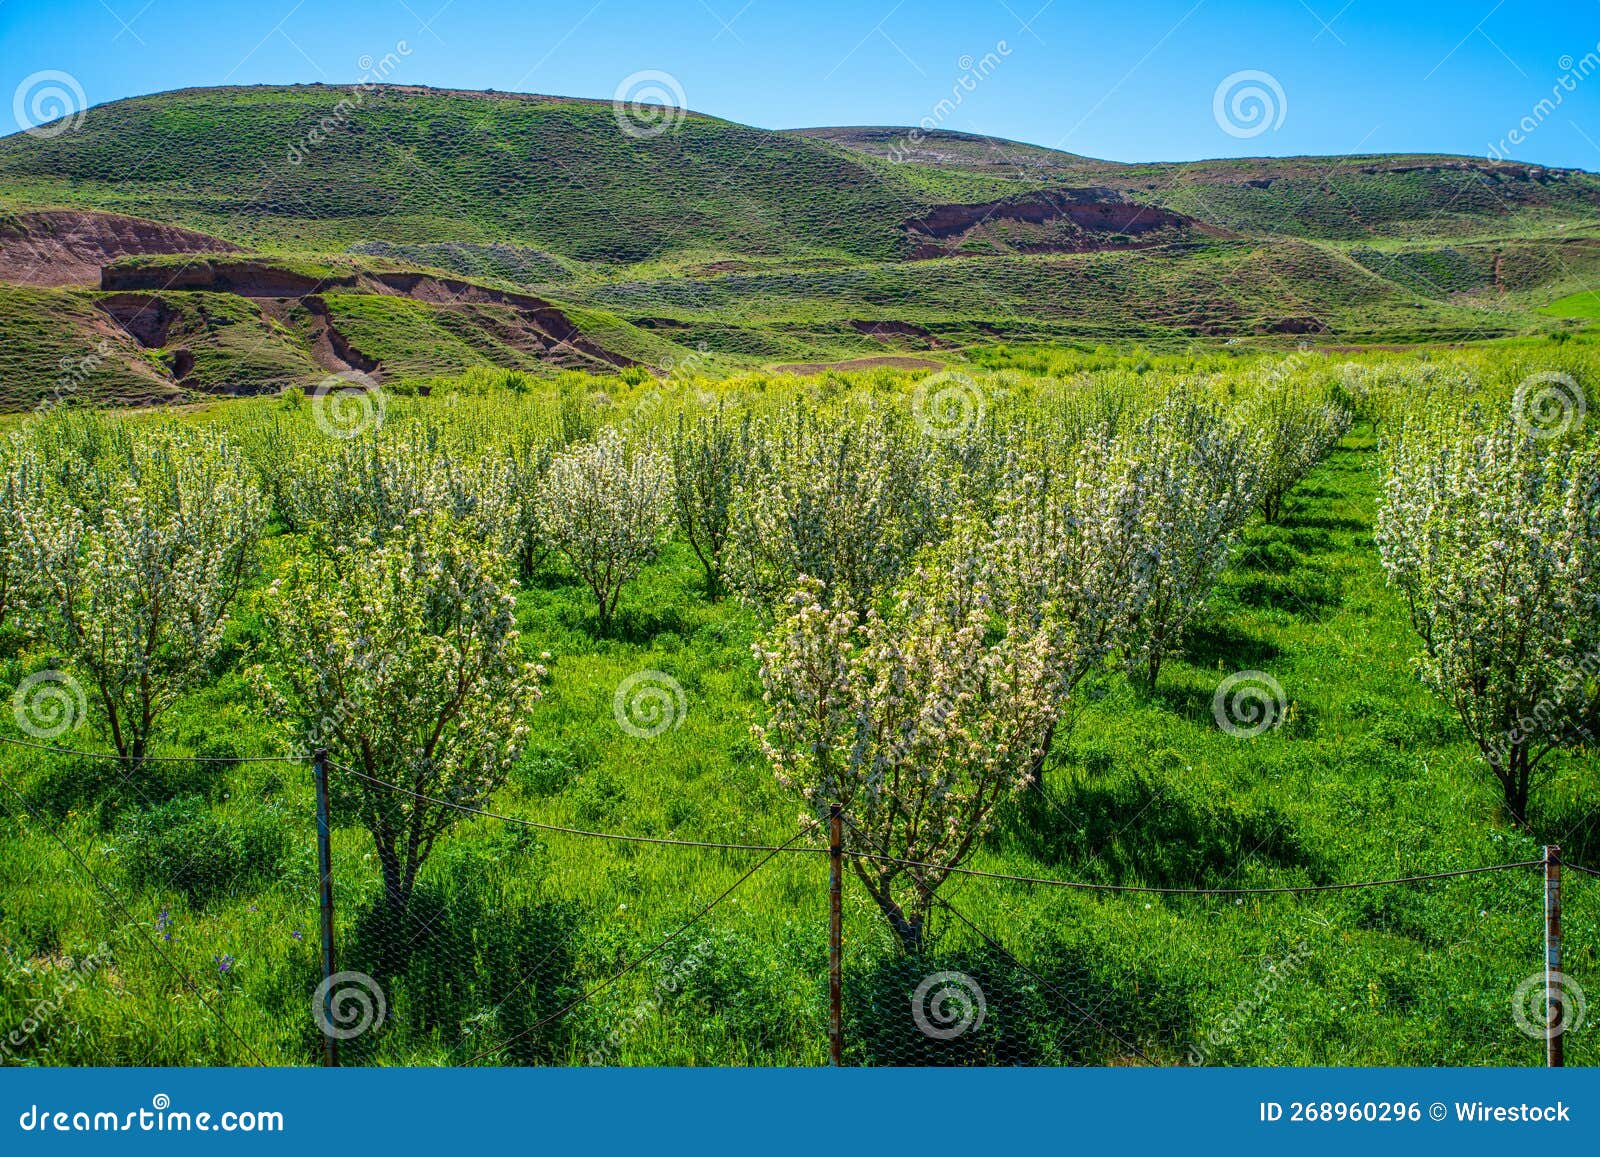 apple trees in the town of takab in west azerbaijan province, iran.